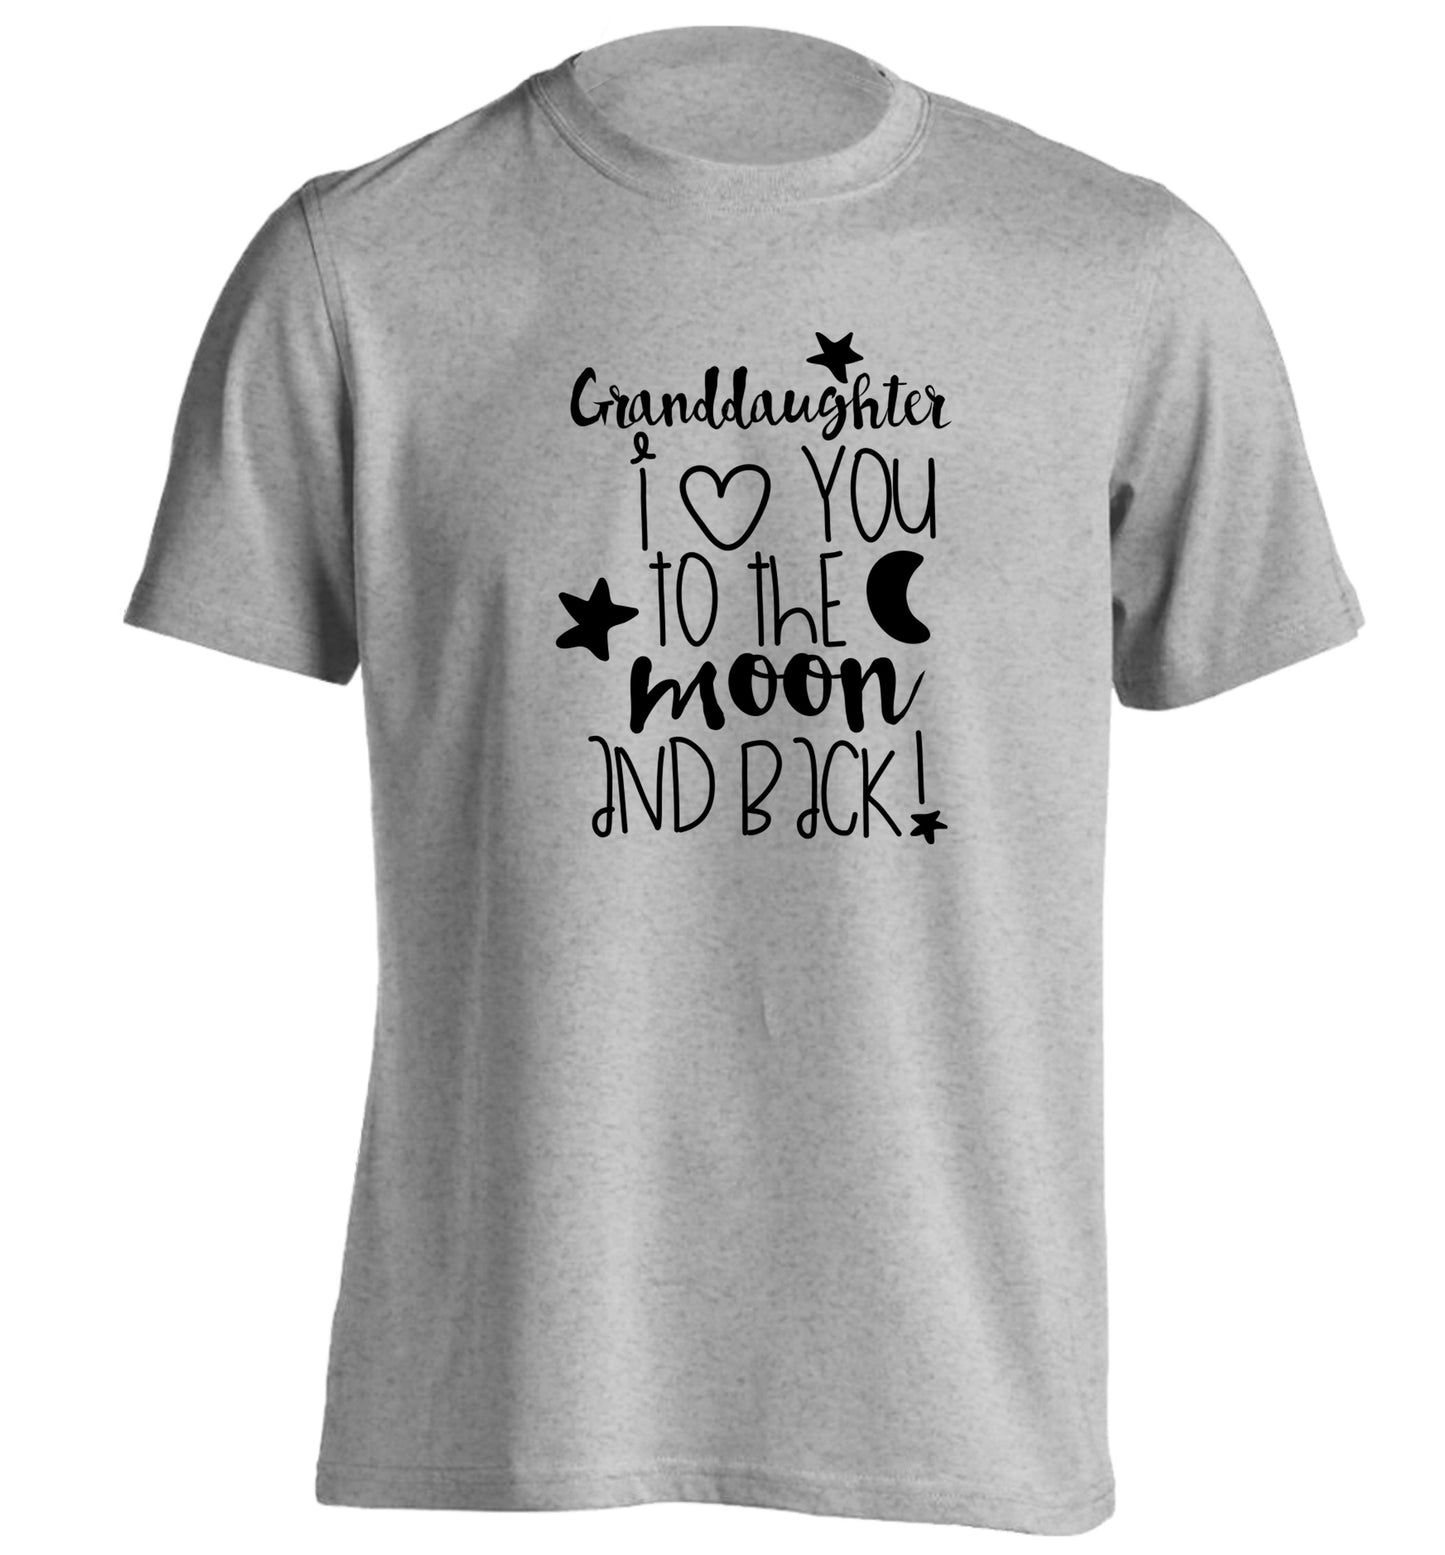 Granddaughter I love you to the moon and back adults unisex grey Tshirt 2XL